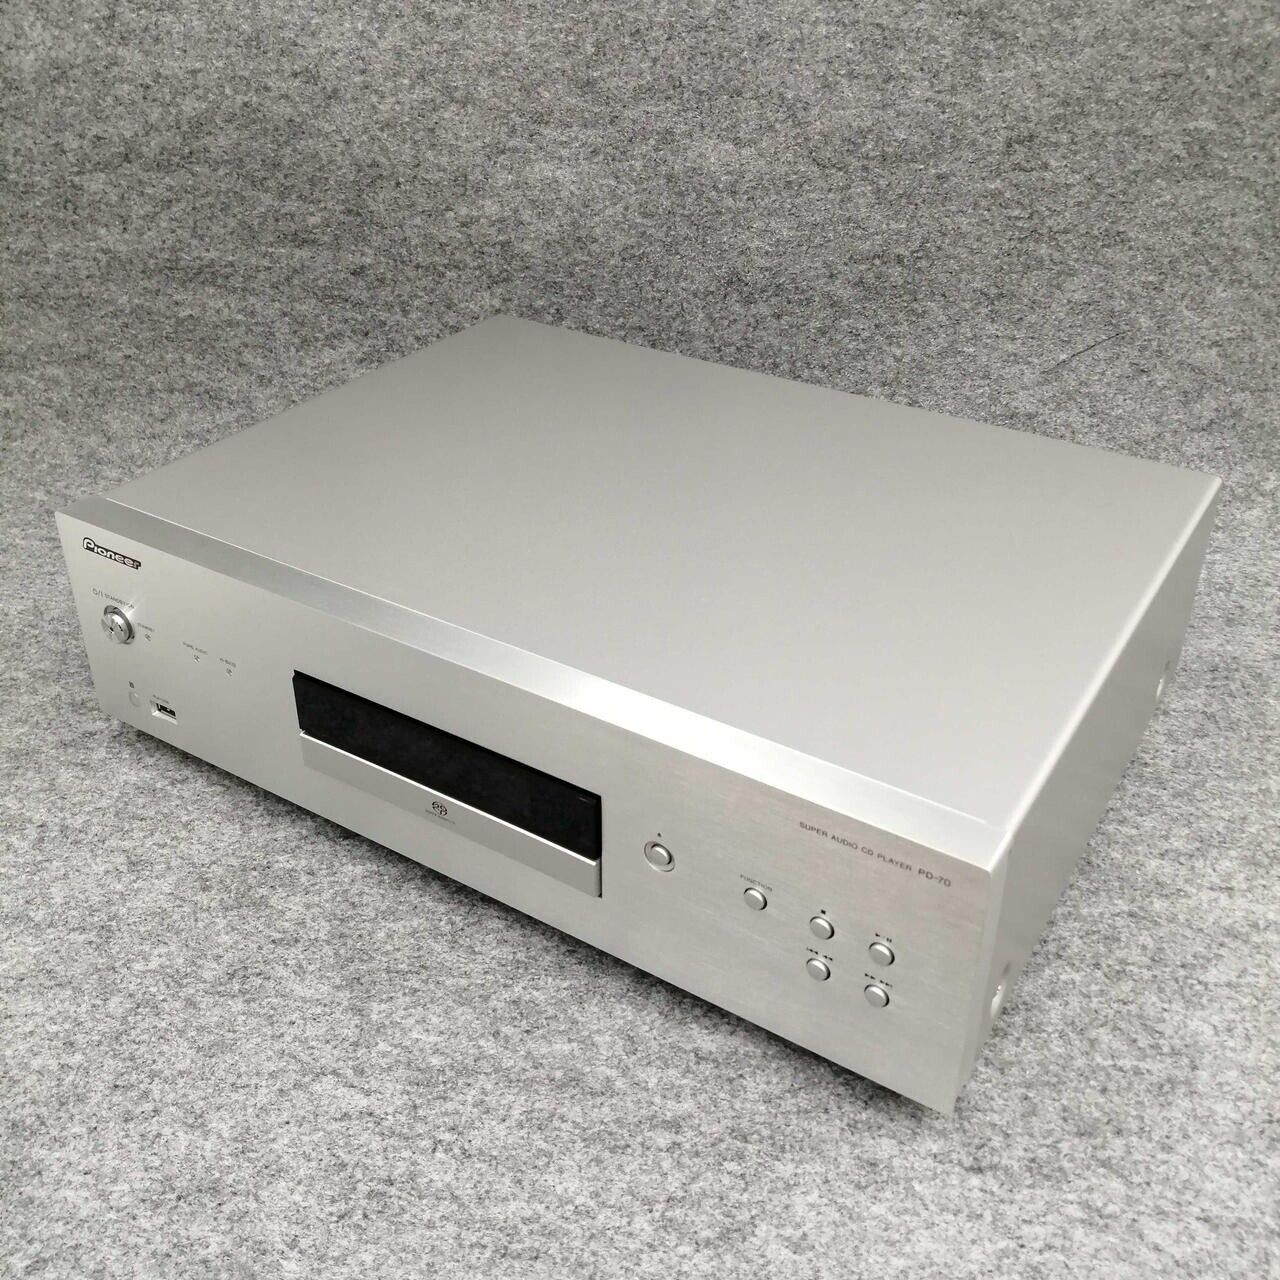 Operation Confirmed Pioneer Pd-70 Sacd/Cd Players Super Audio used